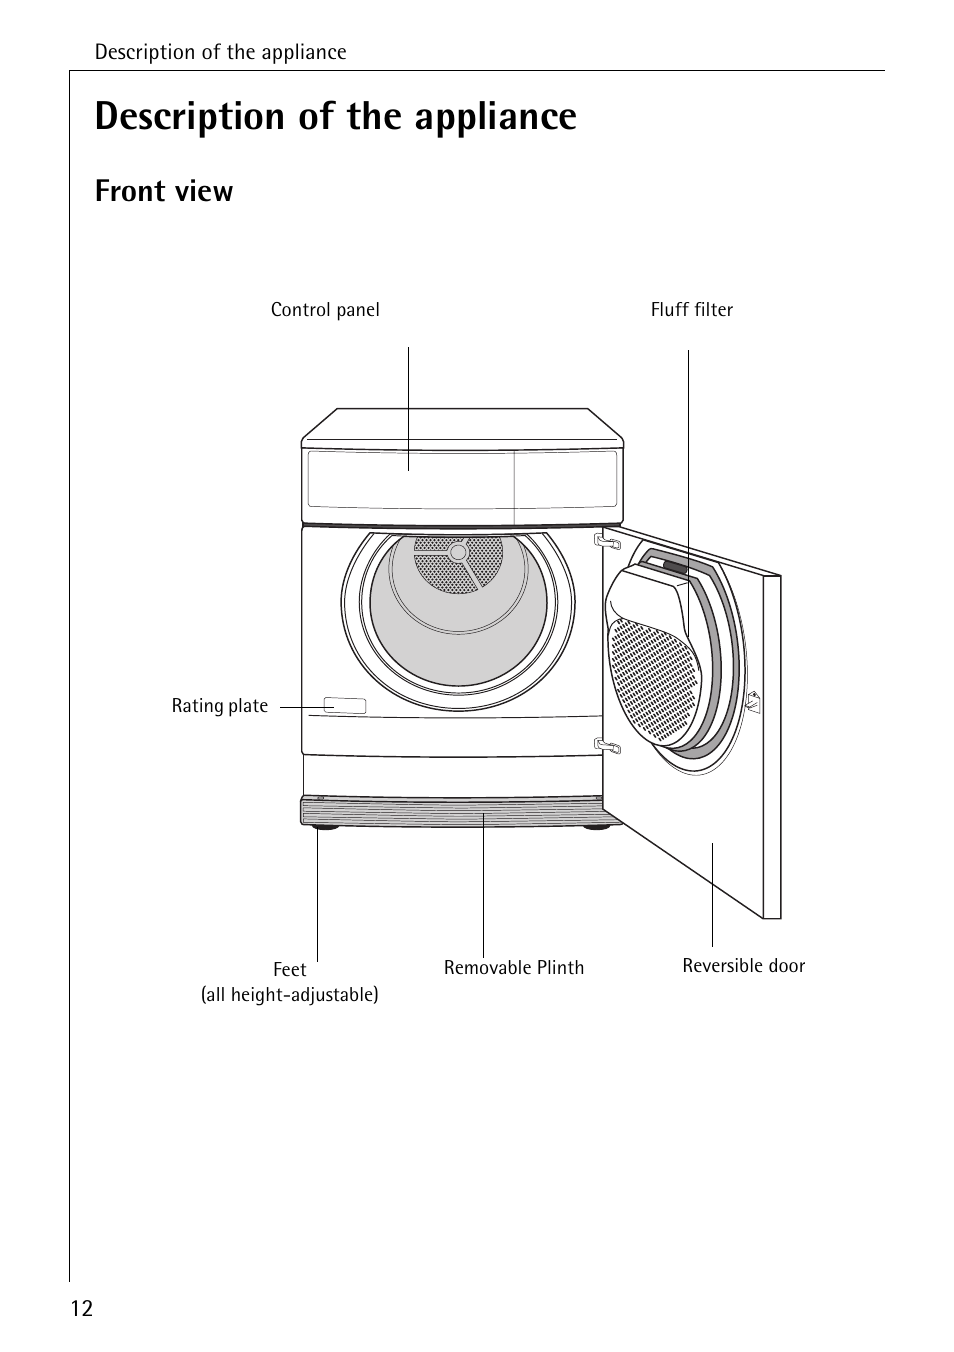 Description of the appliance, Front view | AEG LAVATHERM T300 User Manual |  Page 12 / 32